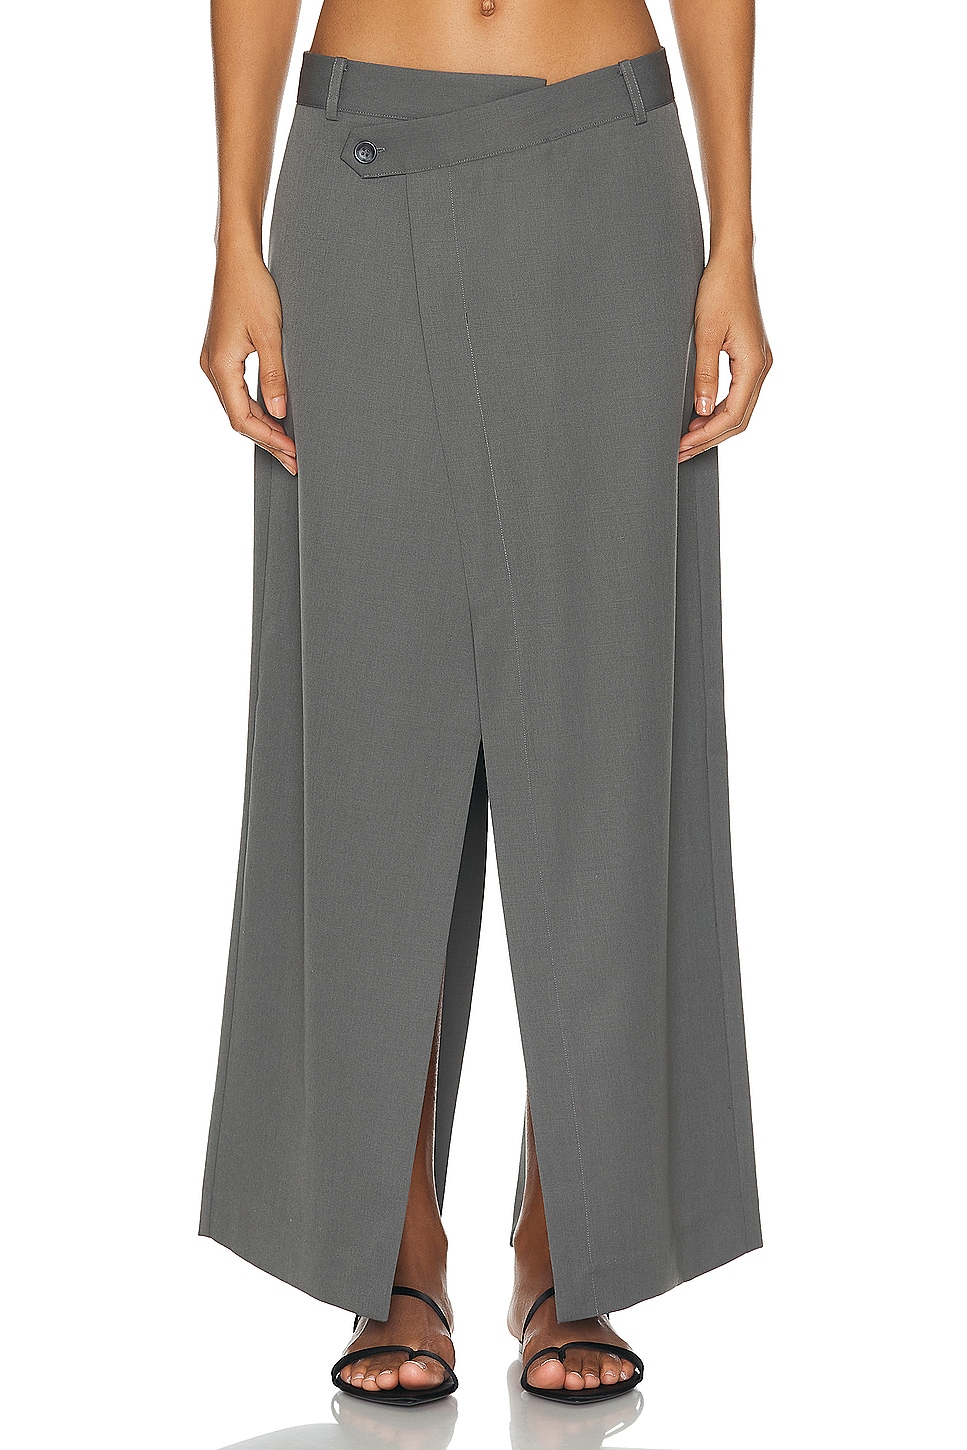 Image 1 of St. Agni Deconstructed Waist Maxi Skirt in Pewter Grey